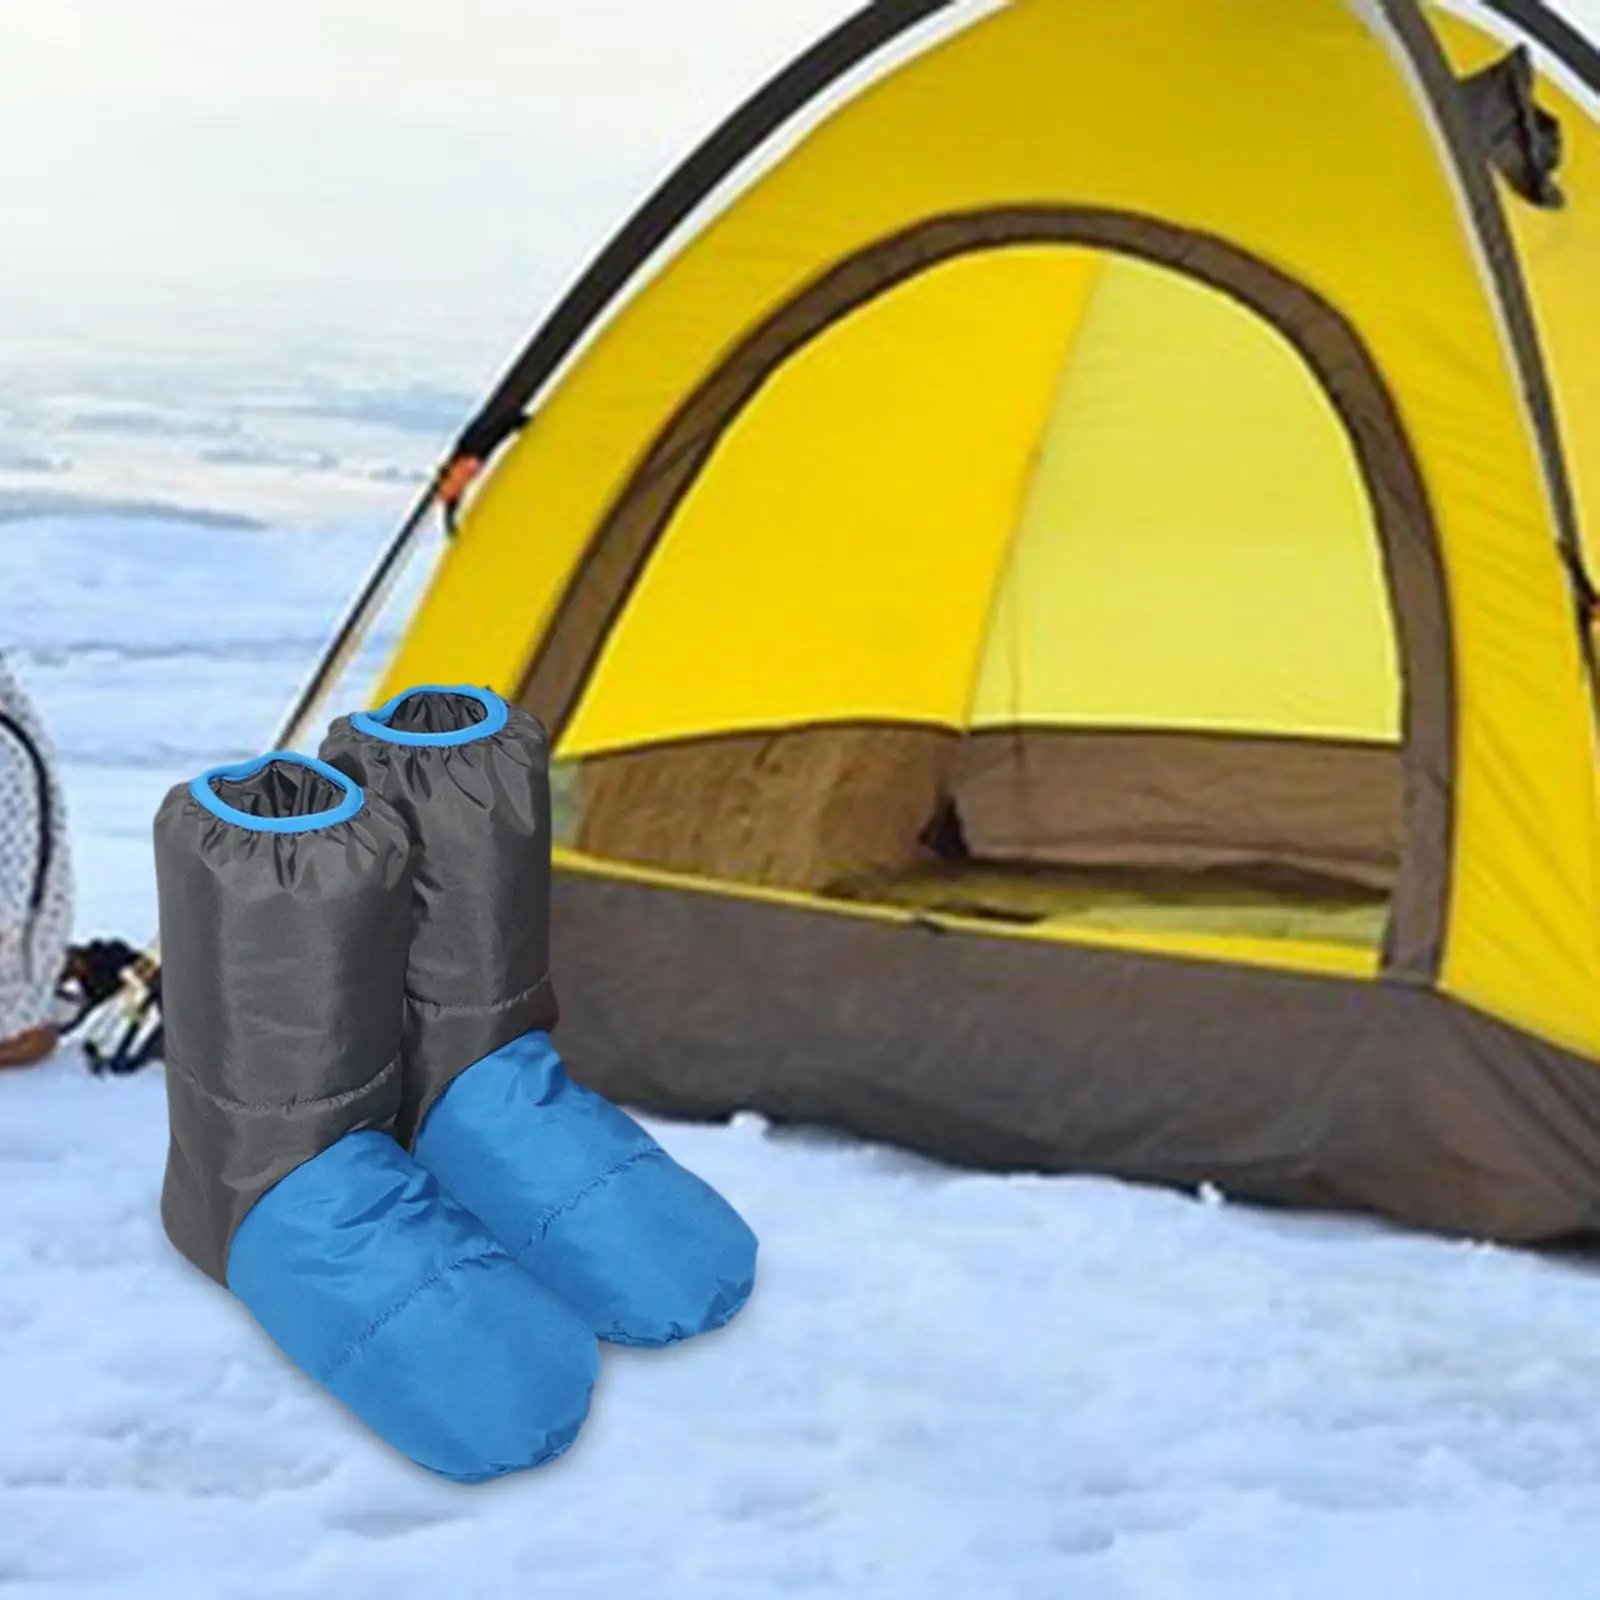 Down Booties Down Shoes Foot Socks Comfortable Ankle Snow Boots Insulated Warm Boots Warm Socks for Camping Indoor Home